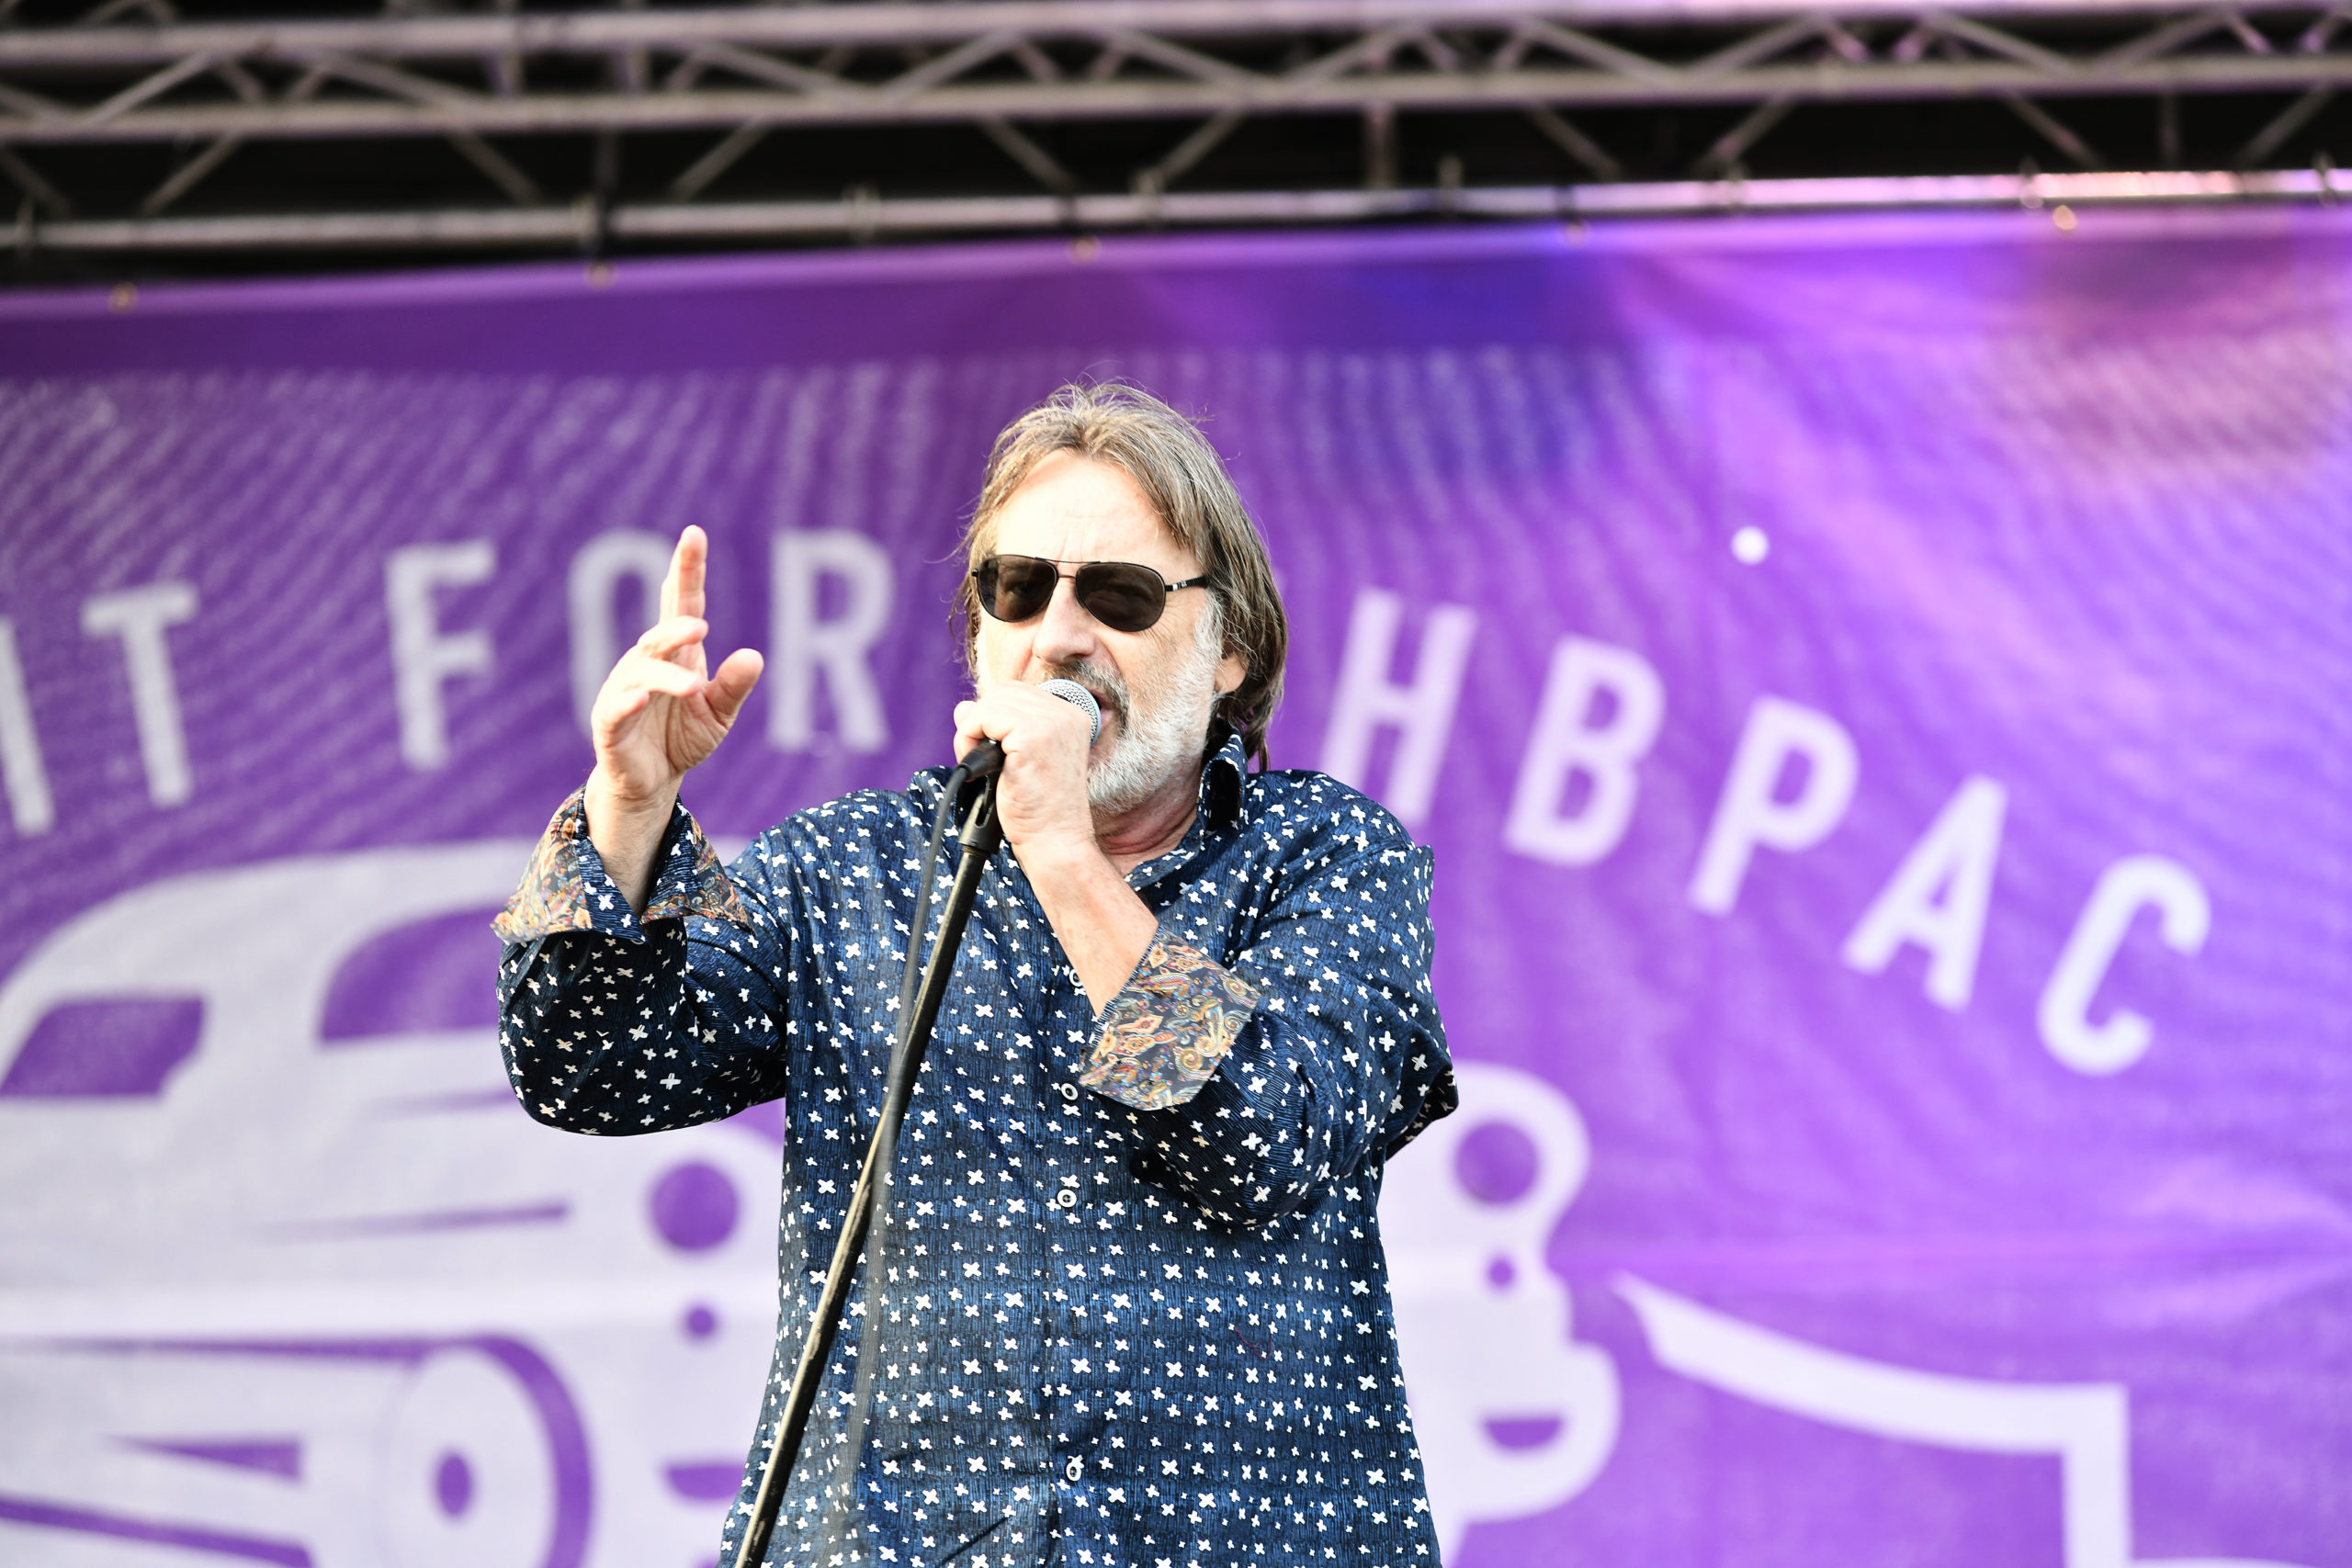 Southside Johnny and the Asbury Jukes perform on the Great Lawn in Westhampton Beach on Saturday.